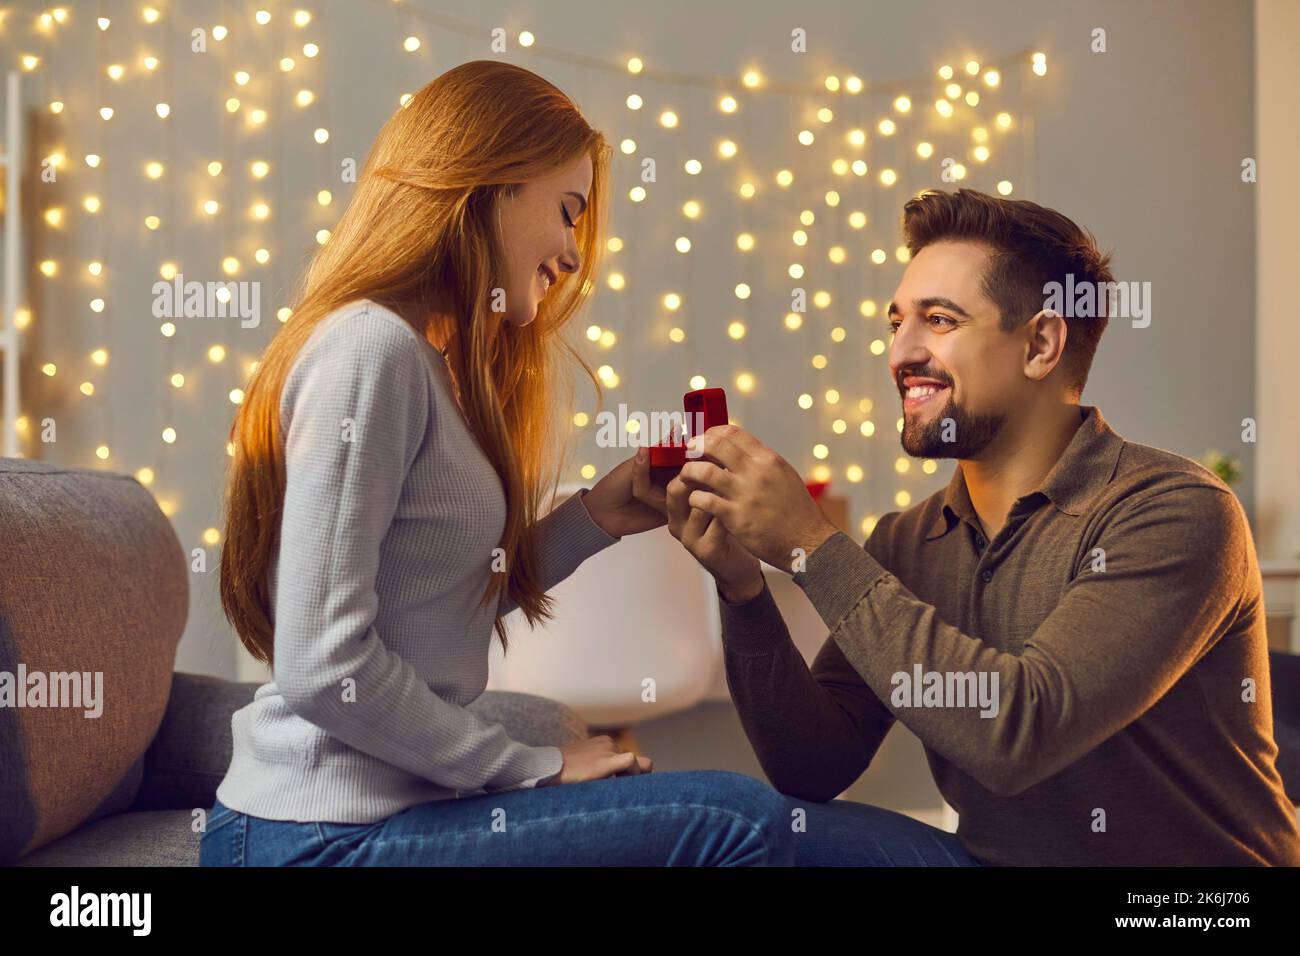 Happy young man proposing to his beloved woman and giving her gold engagement ring Stock Photo